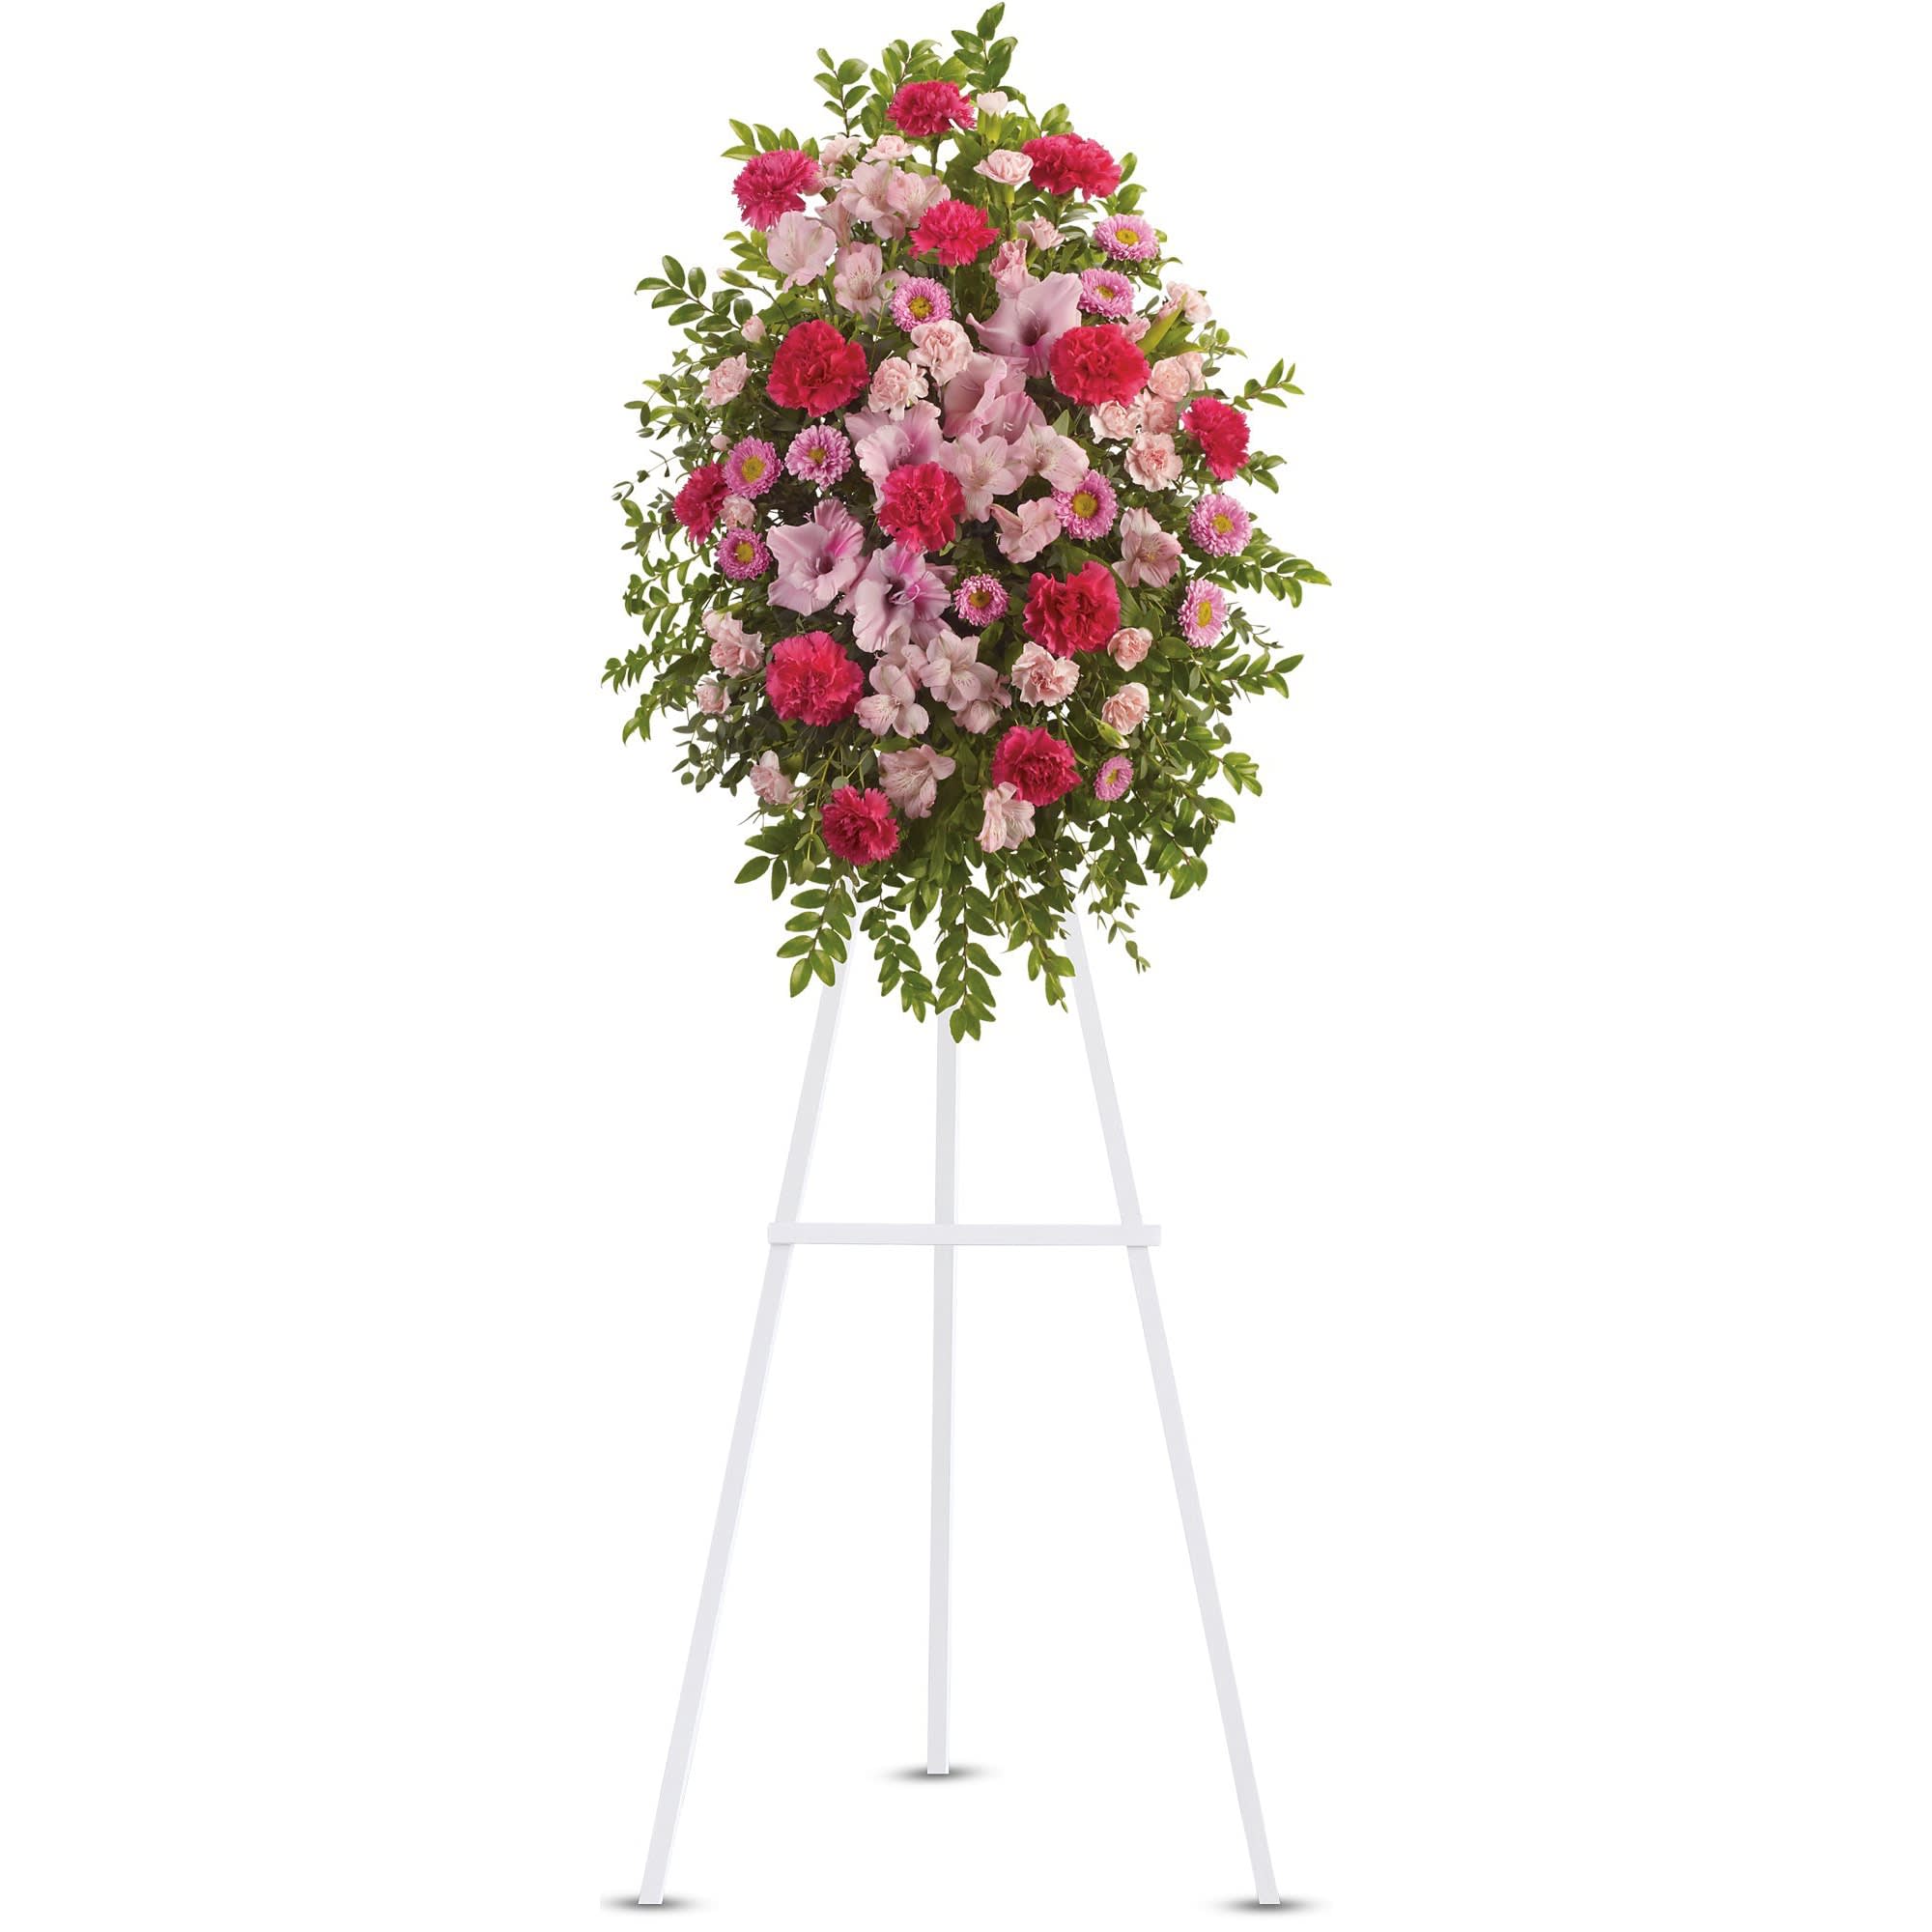 Pink Tribute Spray by Teleflora - With a bounty of lovely pink flowers and simple greens, this pretty spray lets you express your sympathy beautifully. 